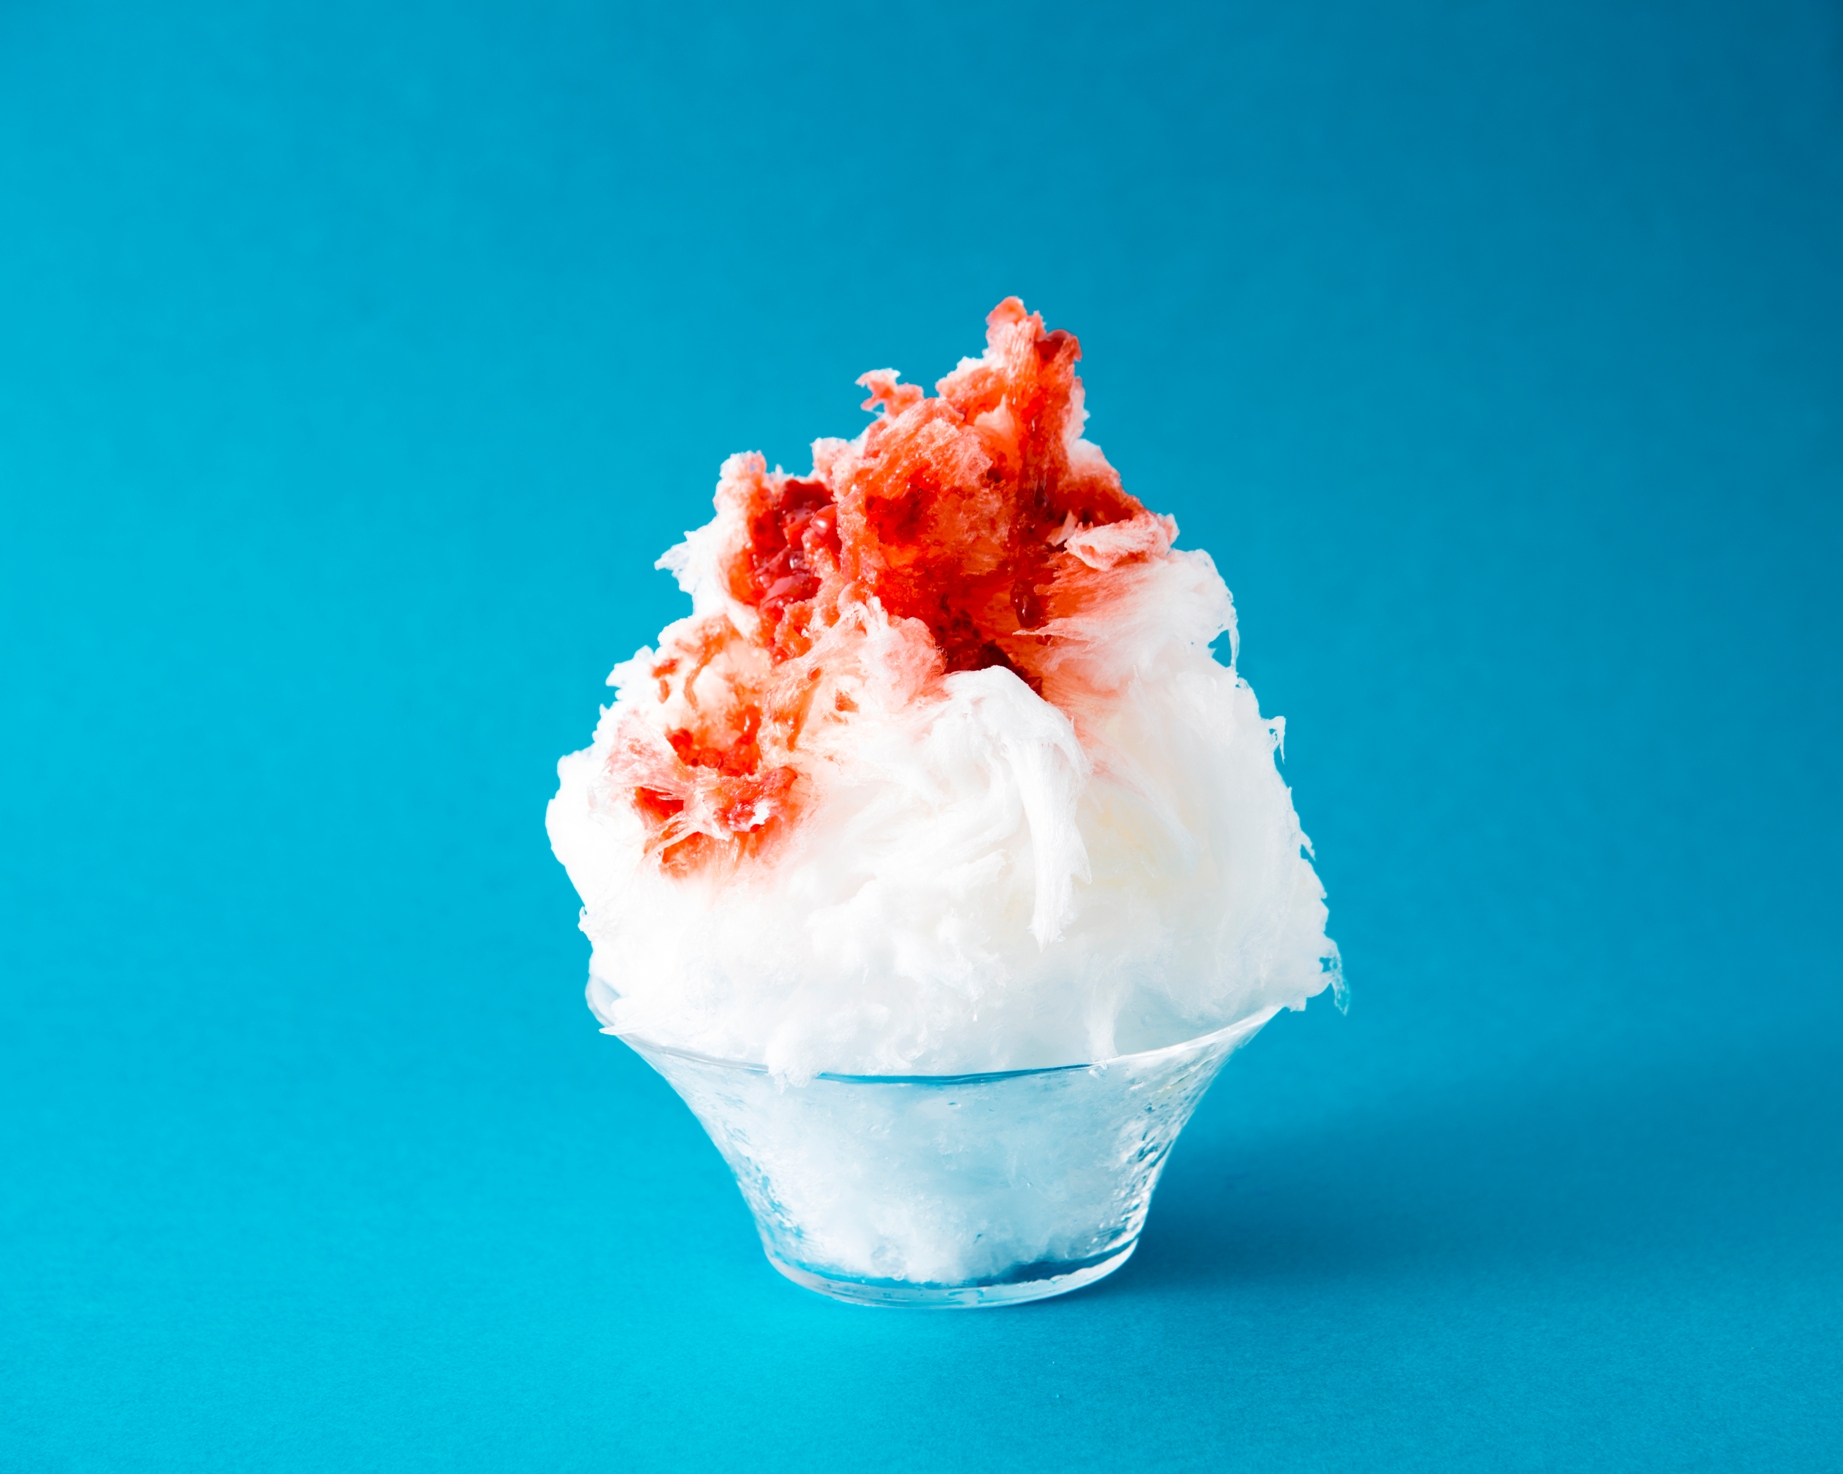 Beat the Heat with Shaved Ice from These Four Shops Near Shinjuku